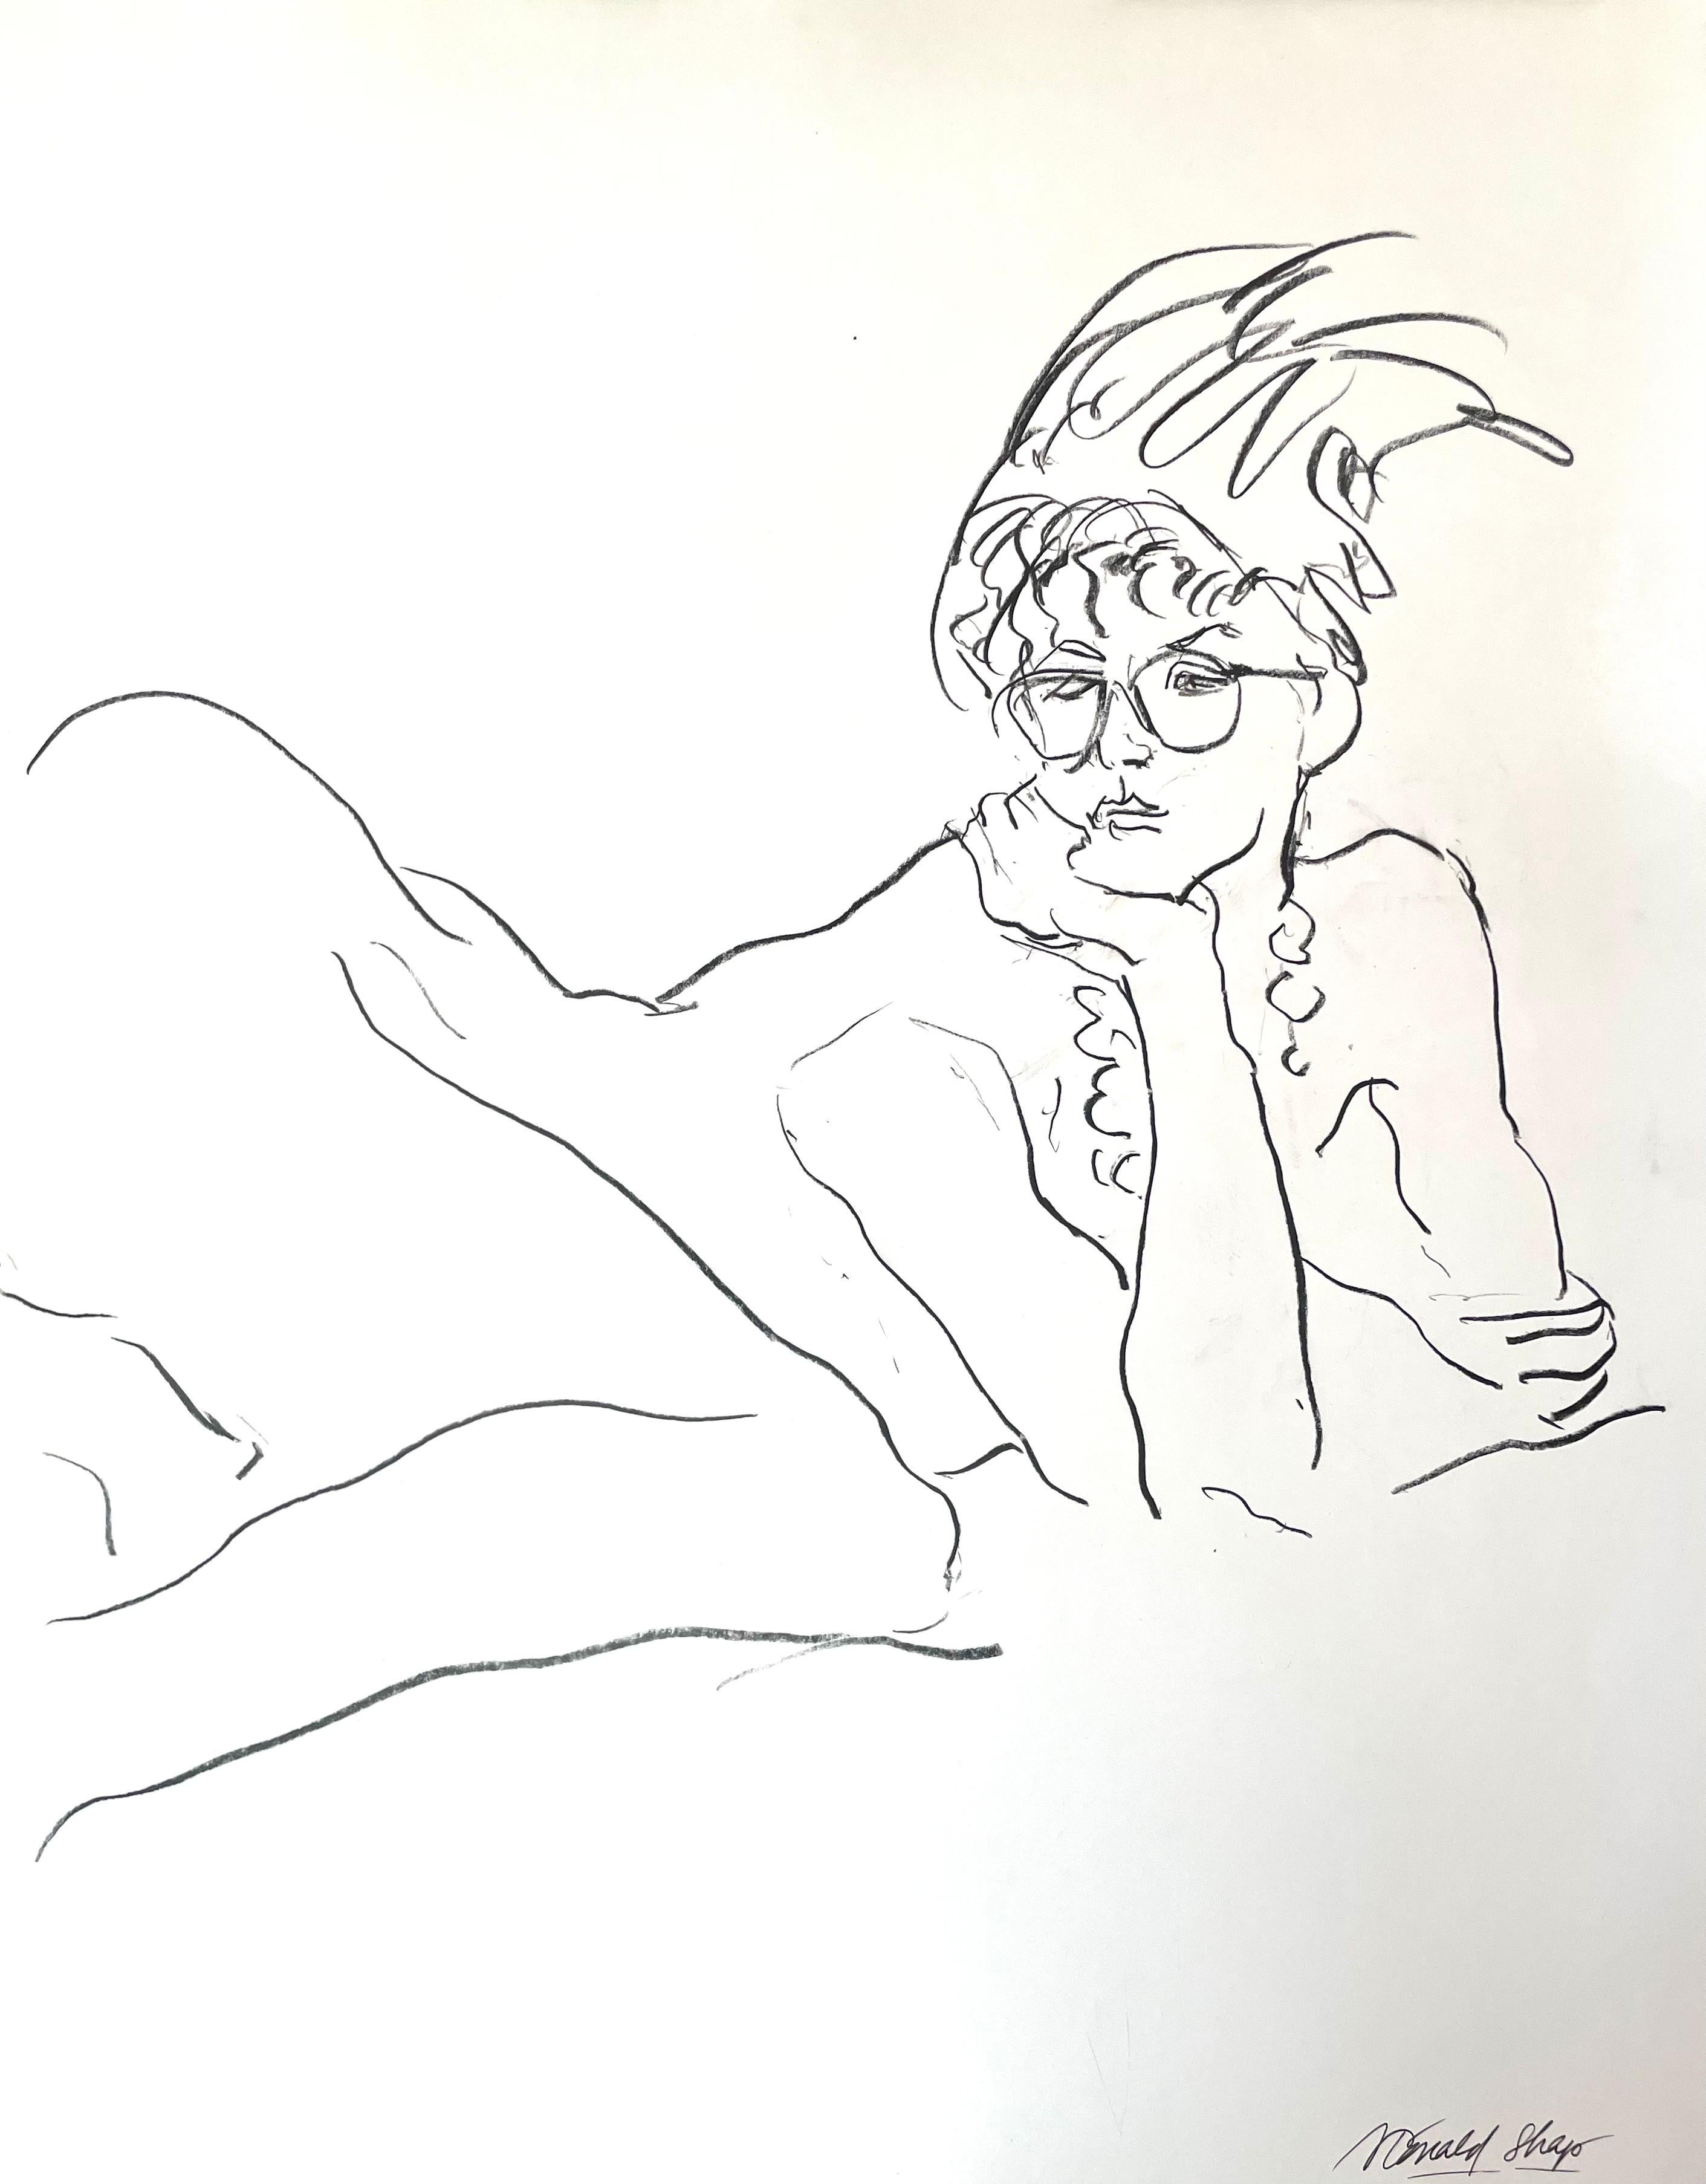 Original oil pastel figure drawing by celebrated, twentieth-century California landscape painter, Ronald Shap. Black and white sketch of lounging nude woman with glasses. 17.5x22.5 inches on glossy paper. Signed. 

This piece is a part of Shap's